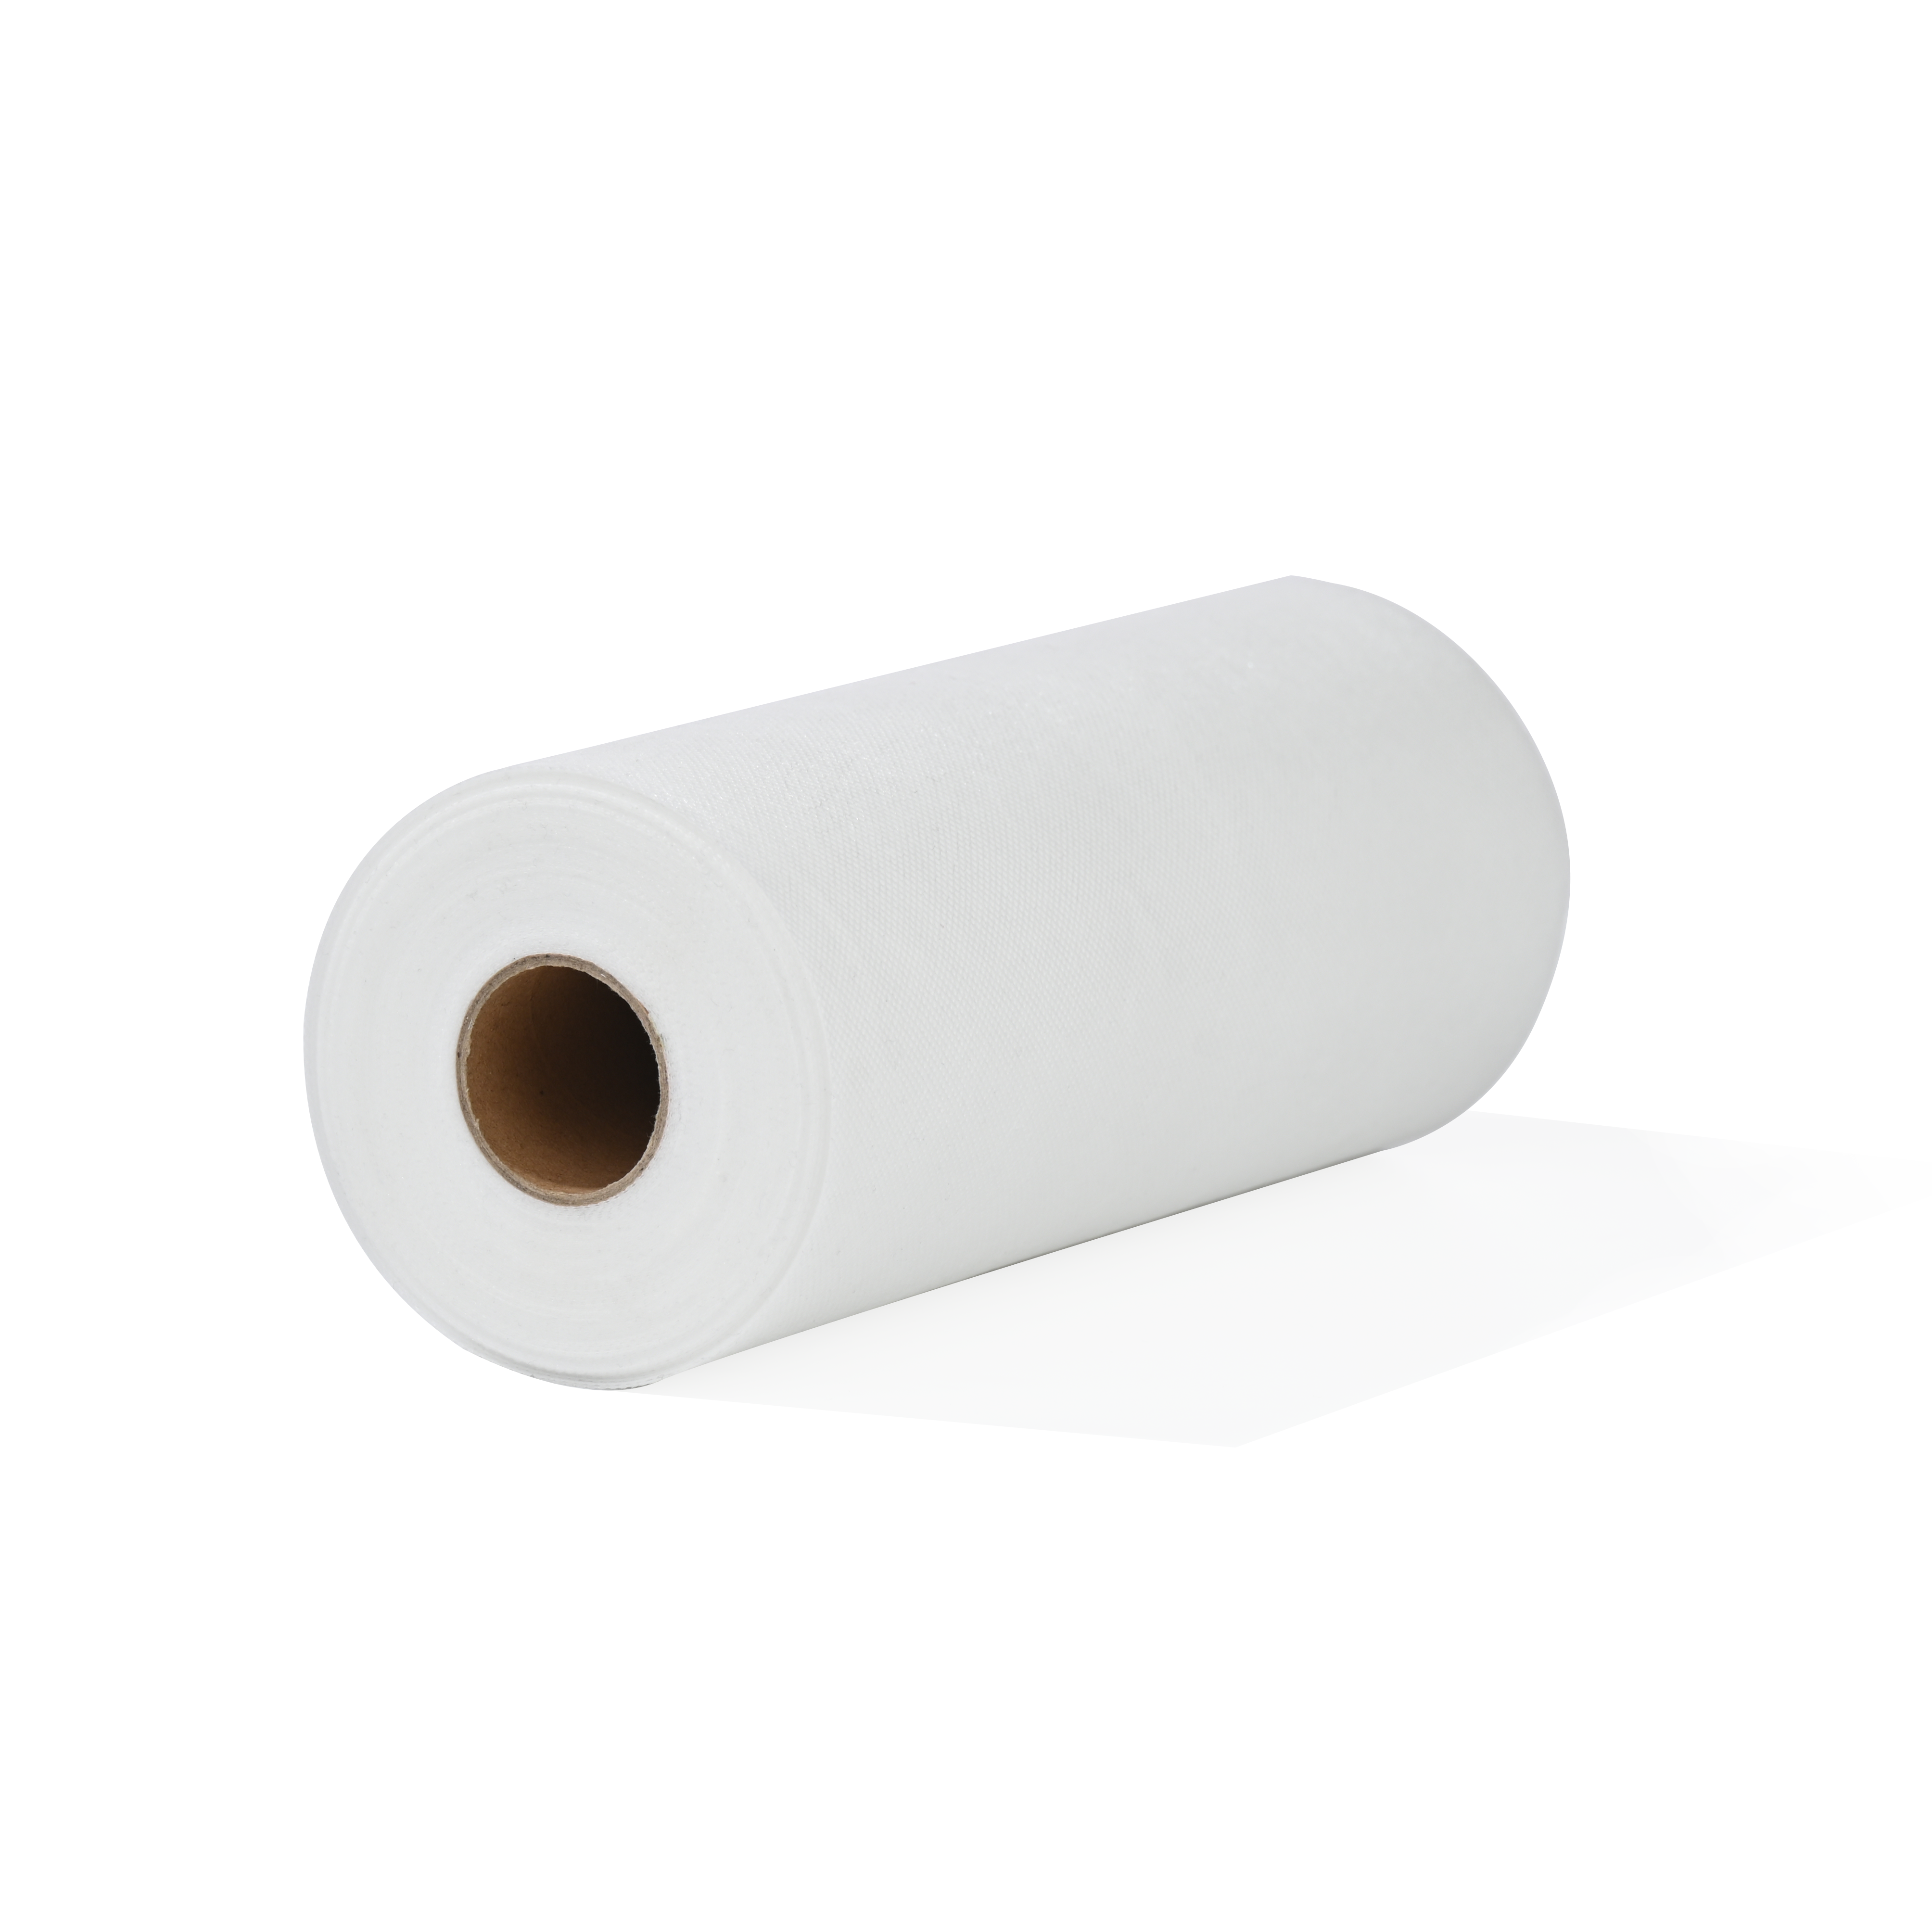 Cut Away Embroidery Machine Stabilizer Backing roll package 2.5 oz free shipping